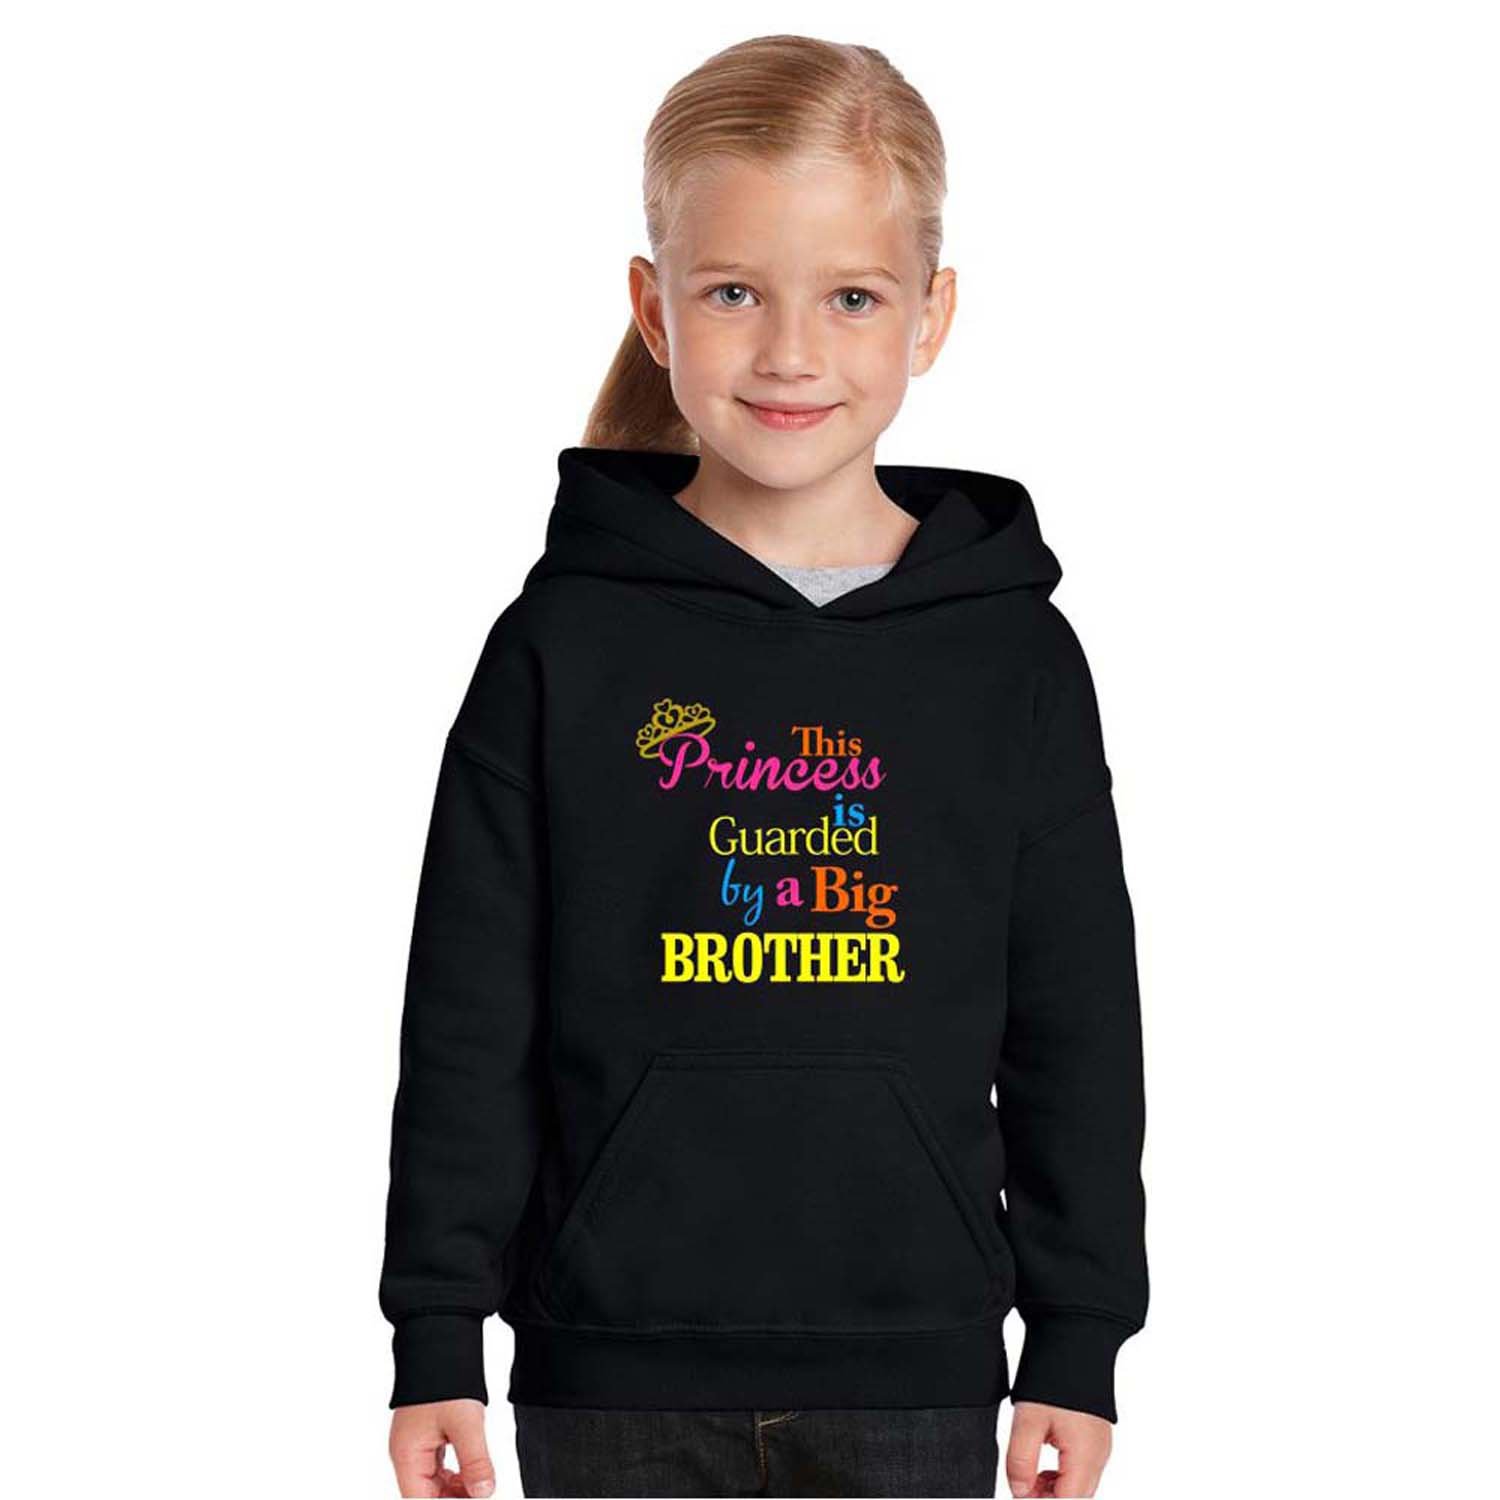 SKU_This Princess is Guarded By a Big Brother Kids Sweatshirt (Black) TS1227